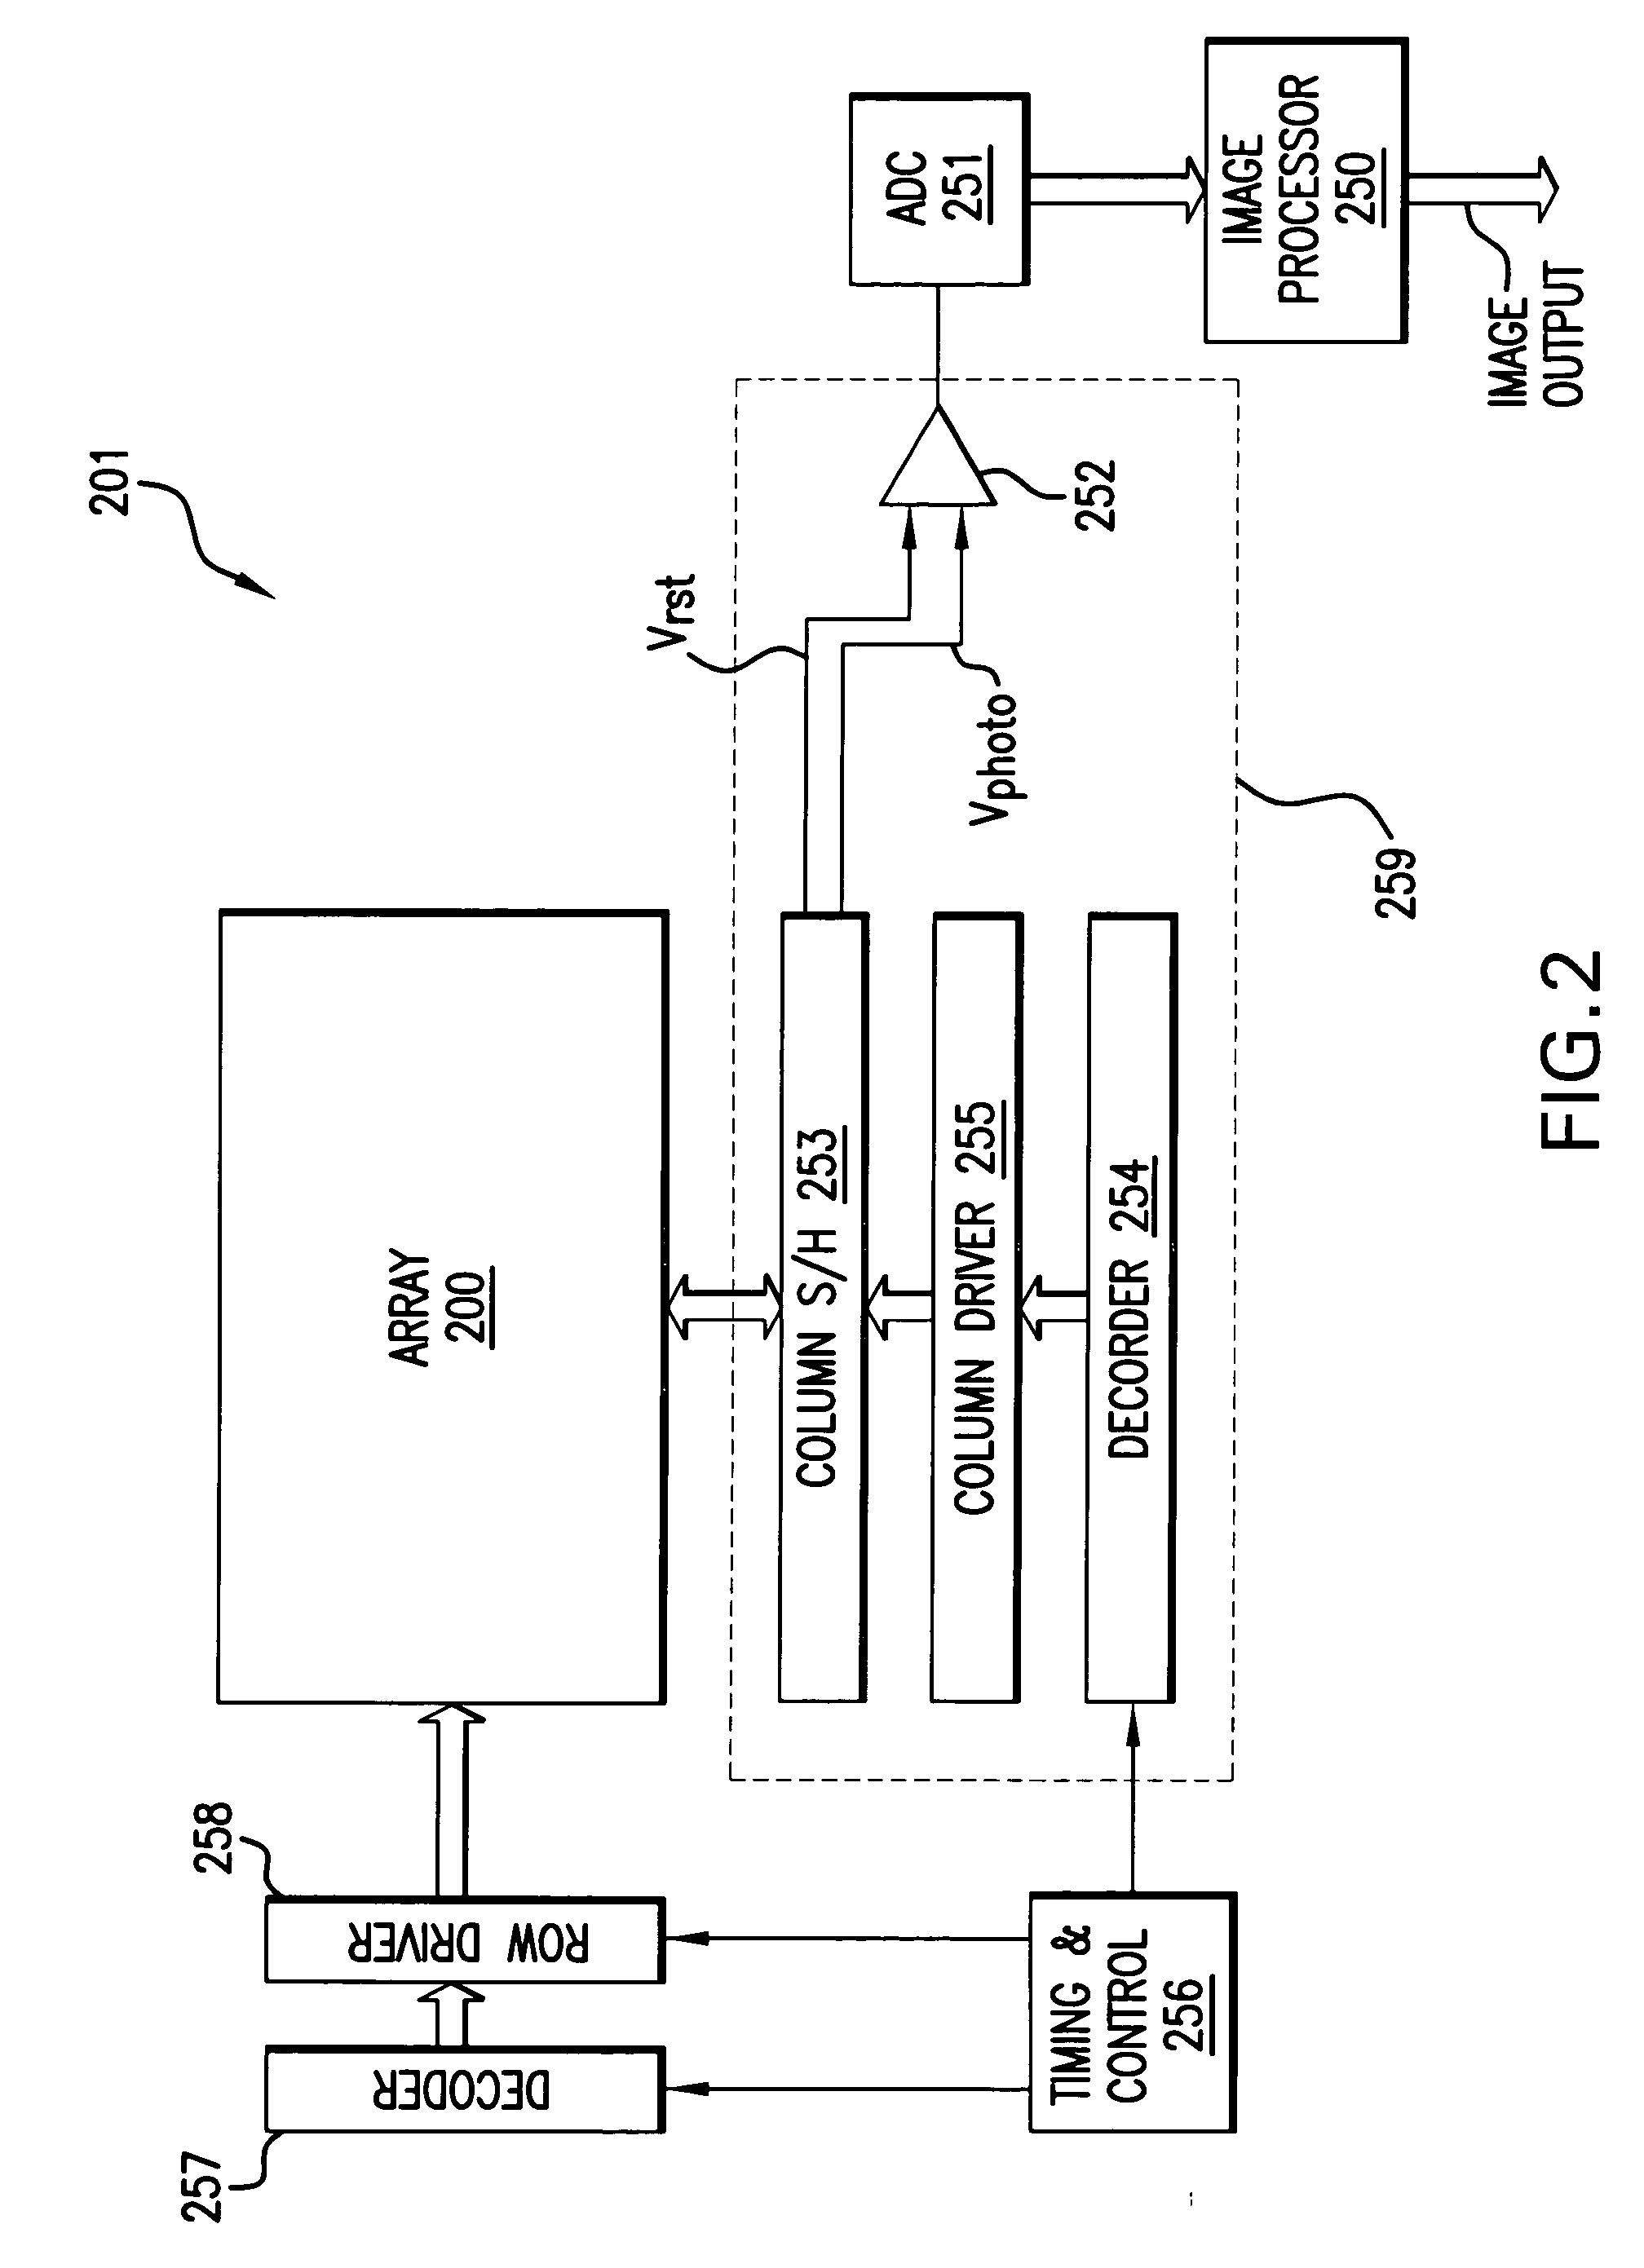 Wide dynamic range operations for imaging